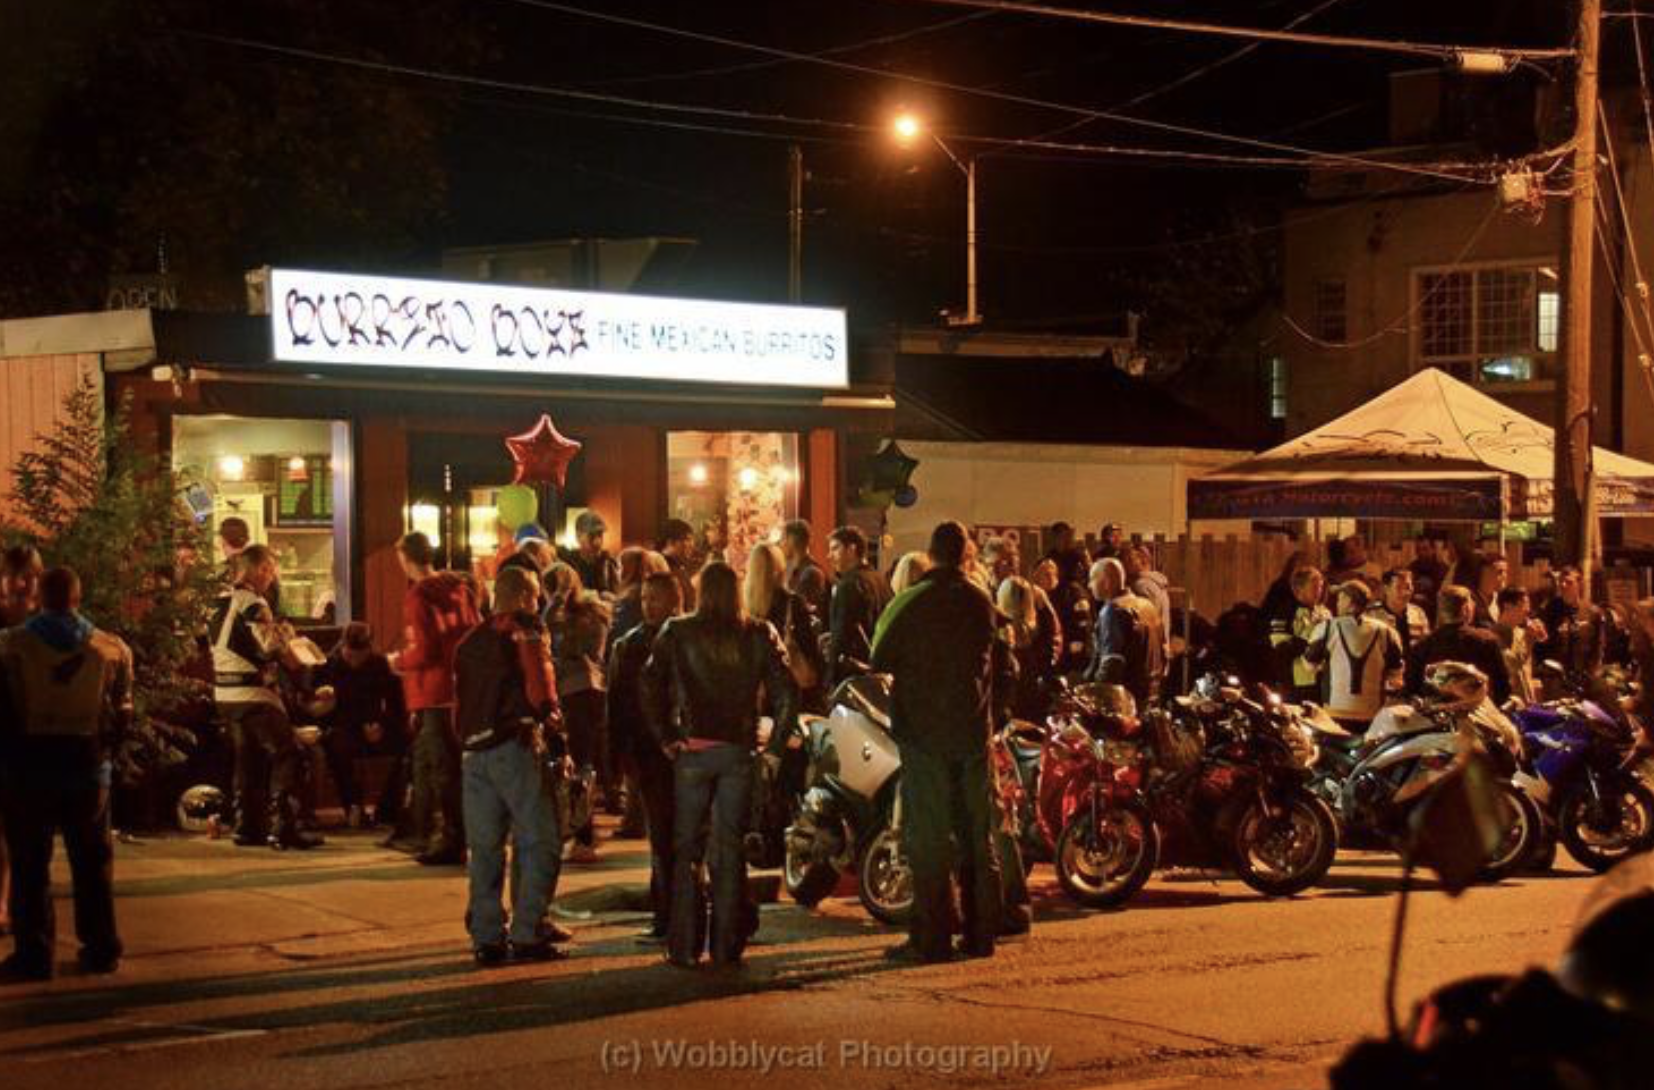 A crowd of people with their motorbikes hanging out and talking in front of an illuminated Burrito Boys restaurant at night. 